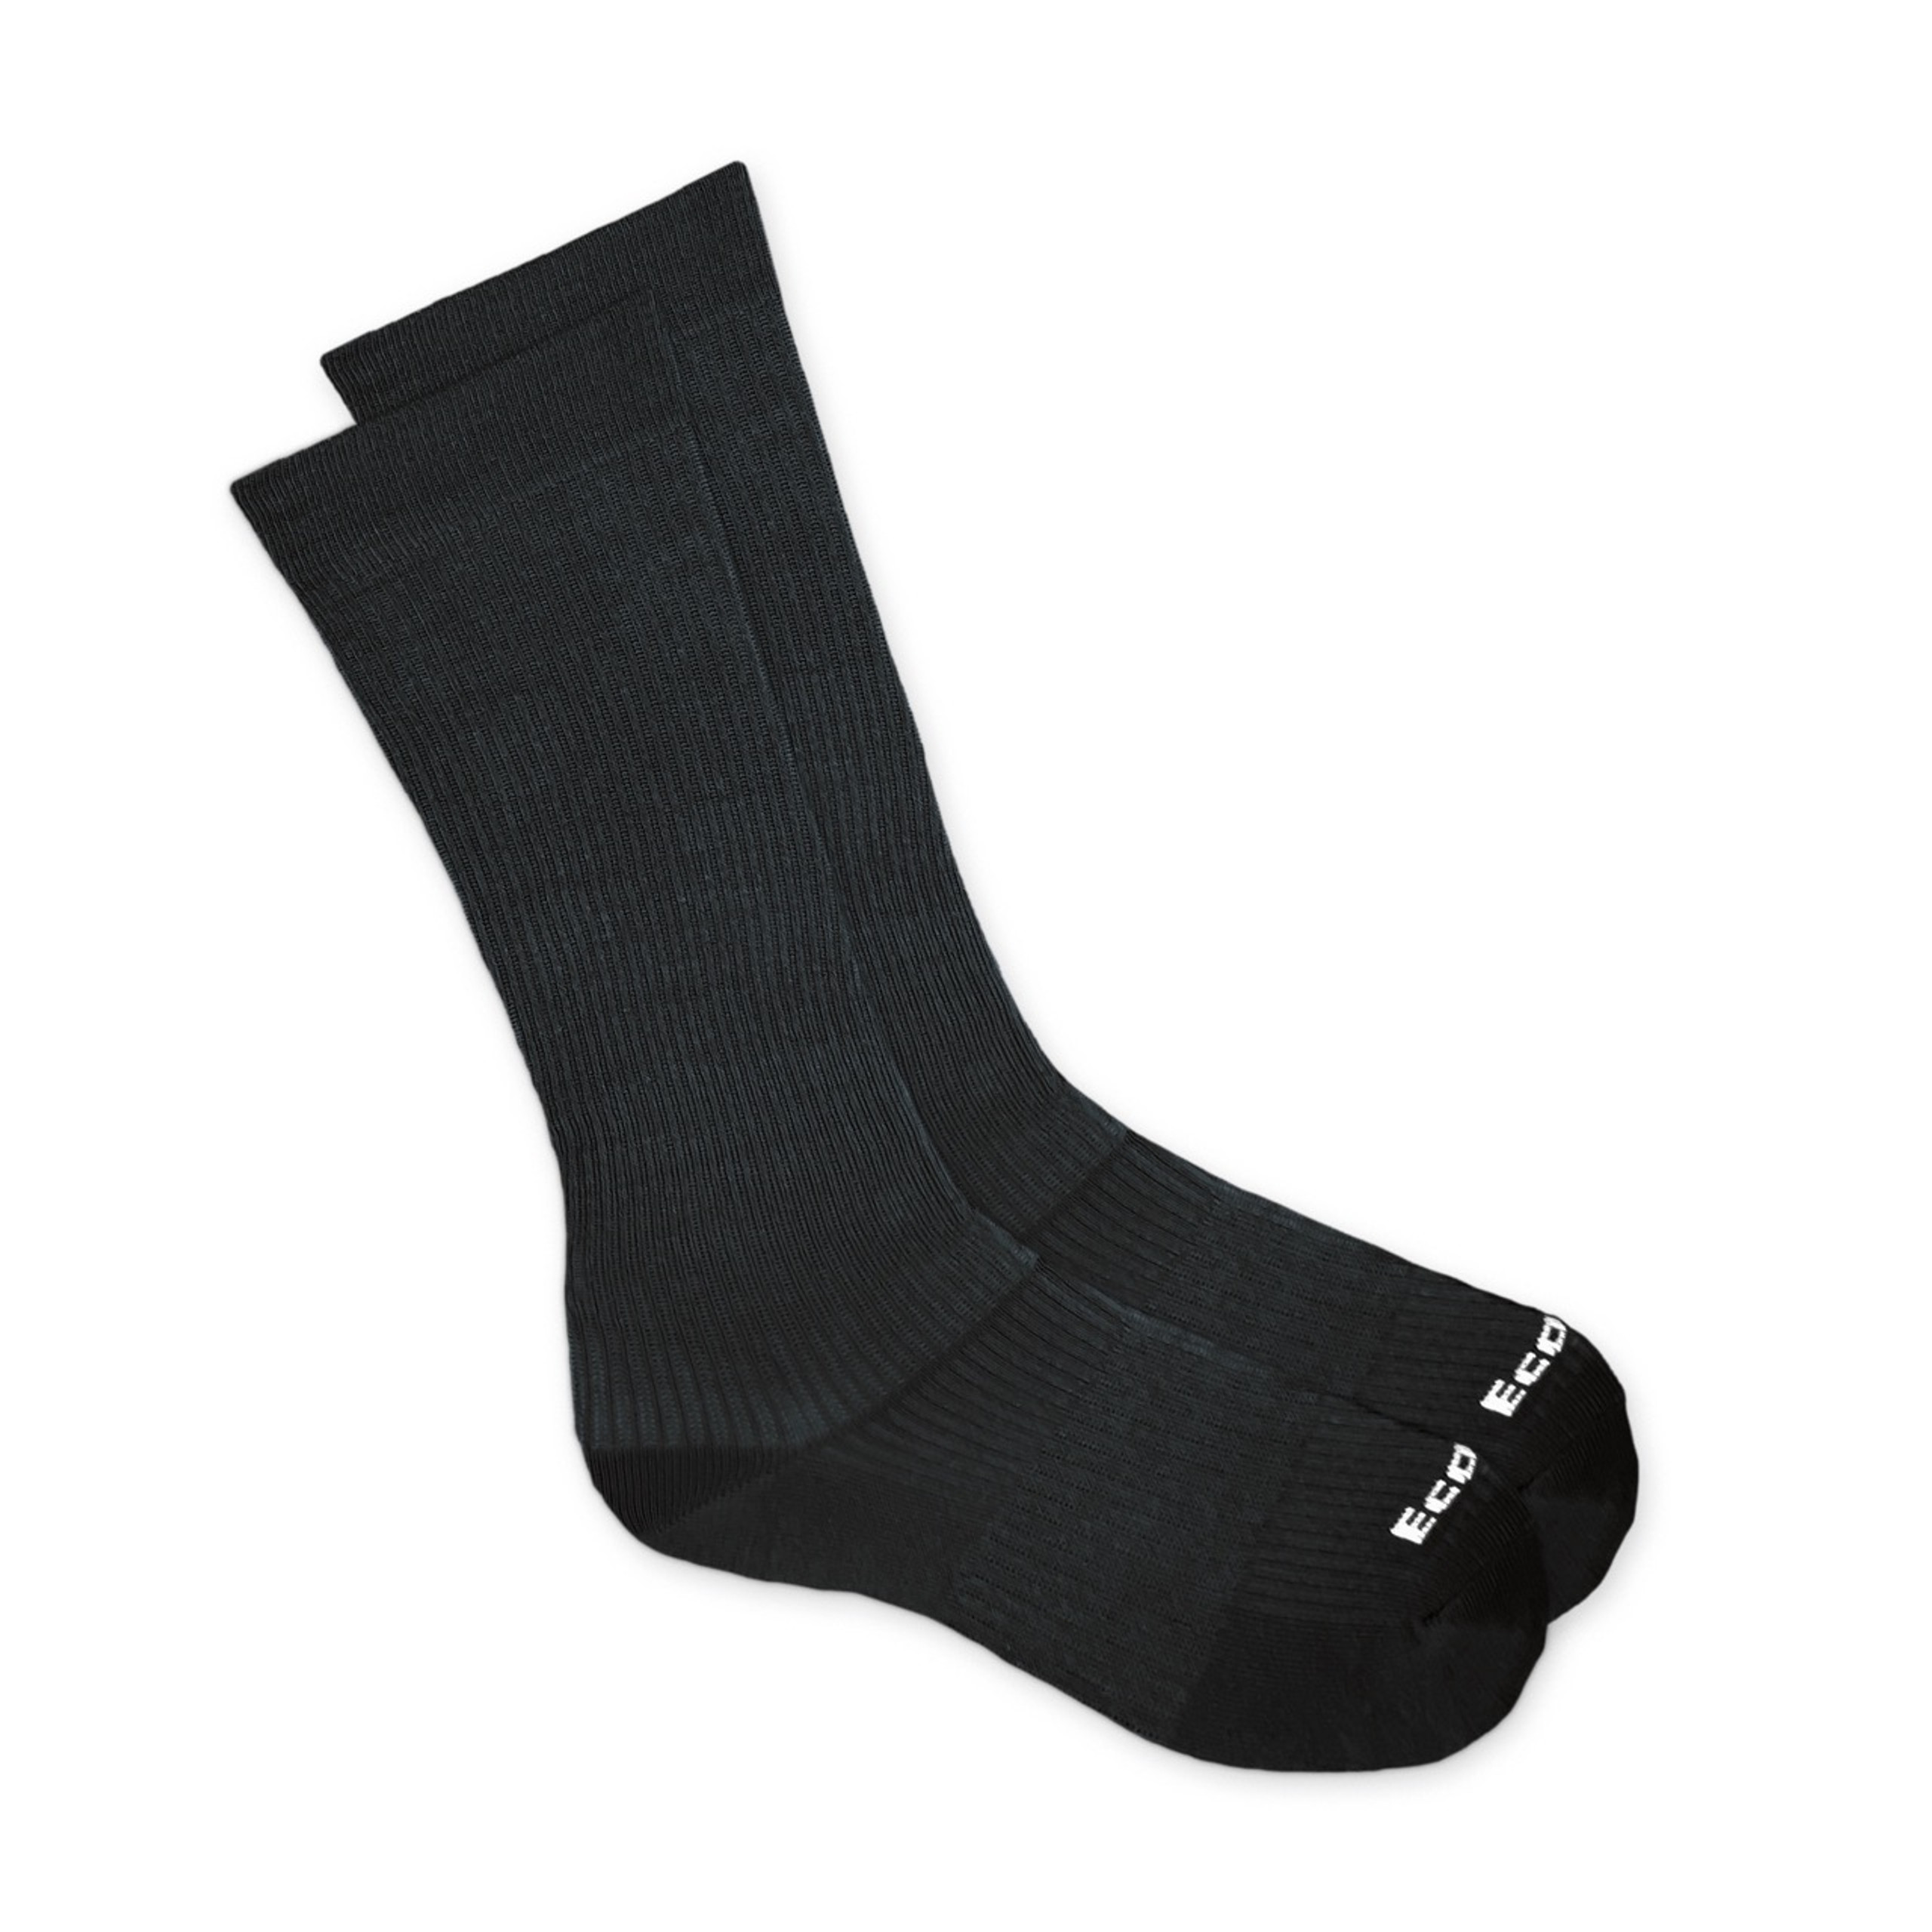 The Best Compression Socks. Made From Bamboo - EcoSox